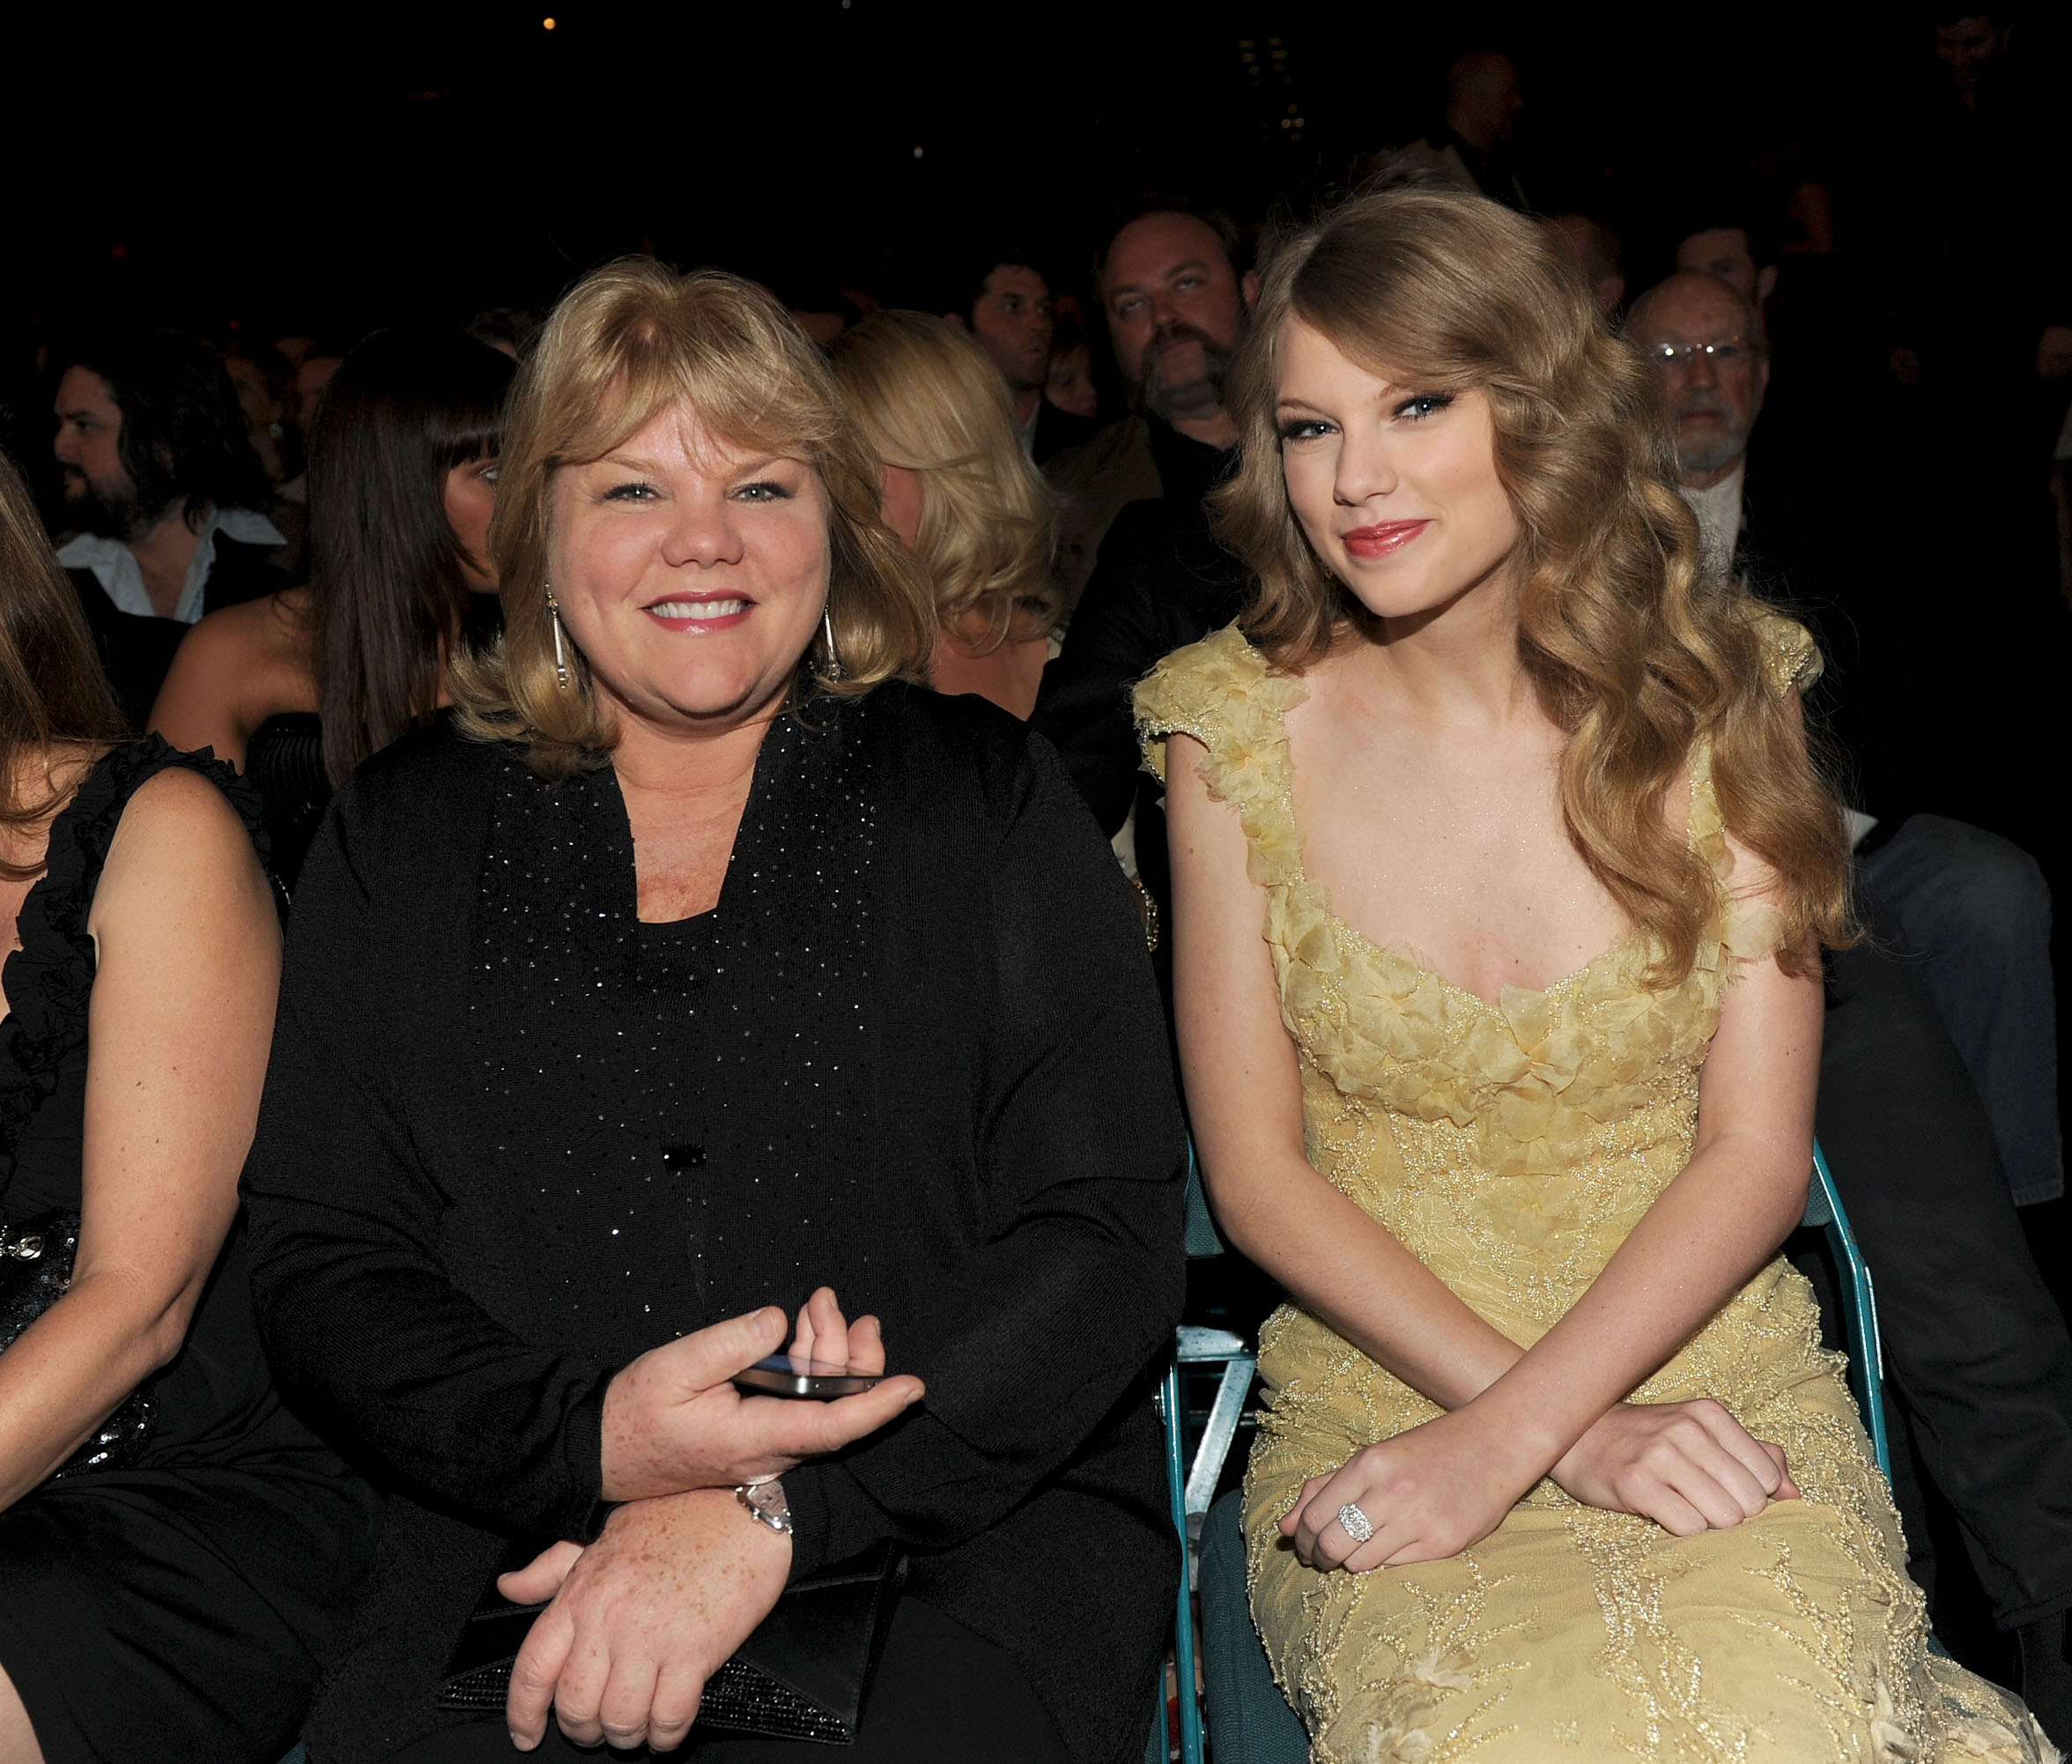 Andrea Swift and Taylor Swift in the audience at the 46th Annual Academy Of Country Music Awards in Las Vegas, Nevada, on April 3, 2011. | Source: Getty Images